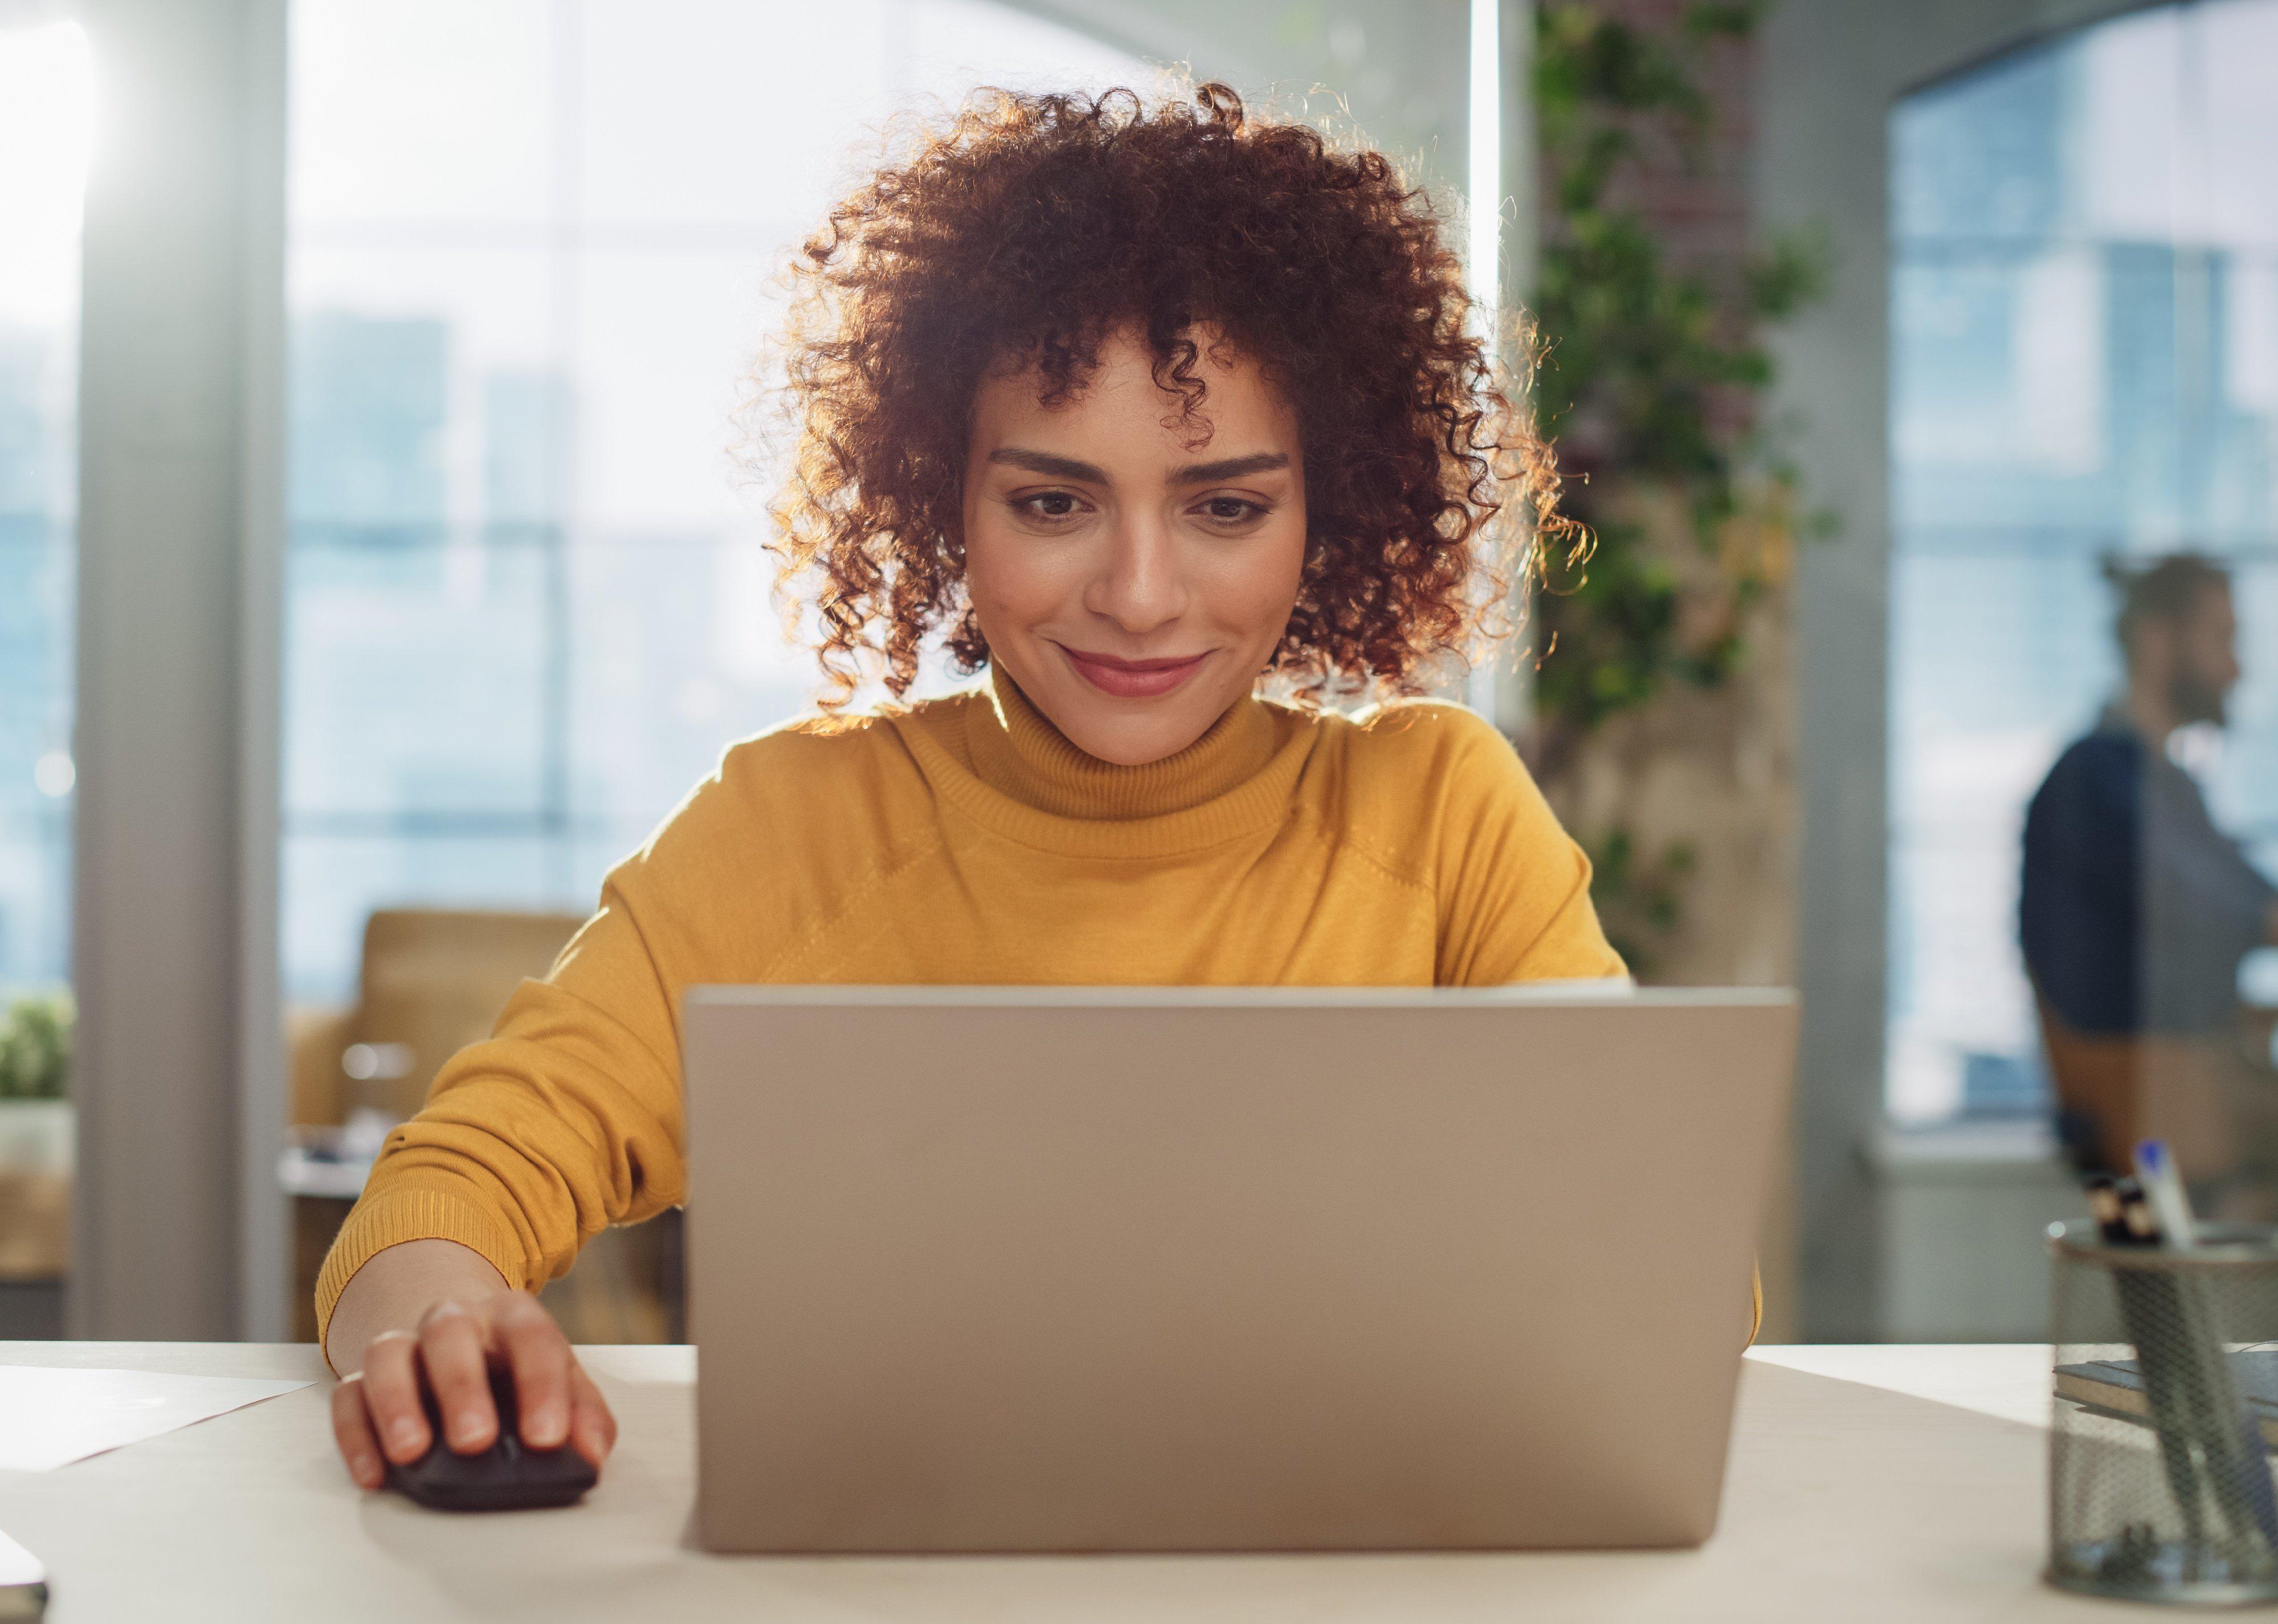 Young woman with curly hair on computer.